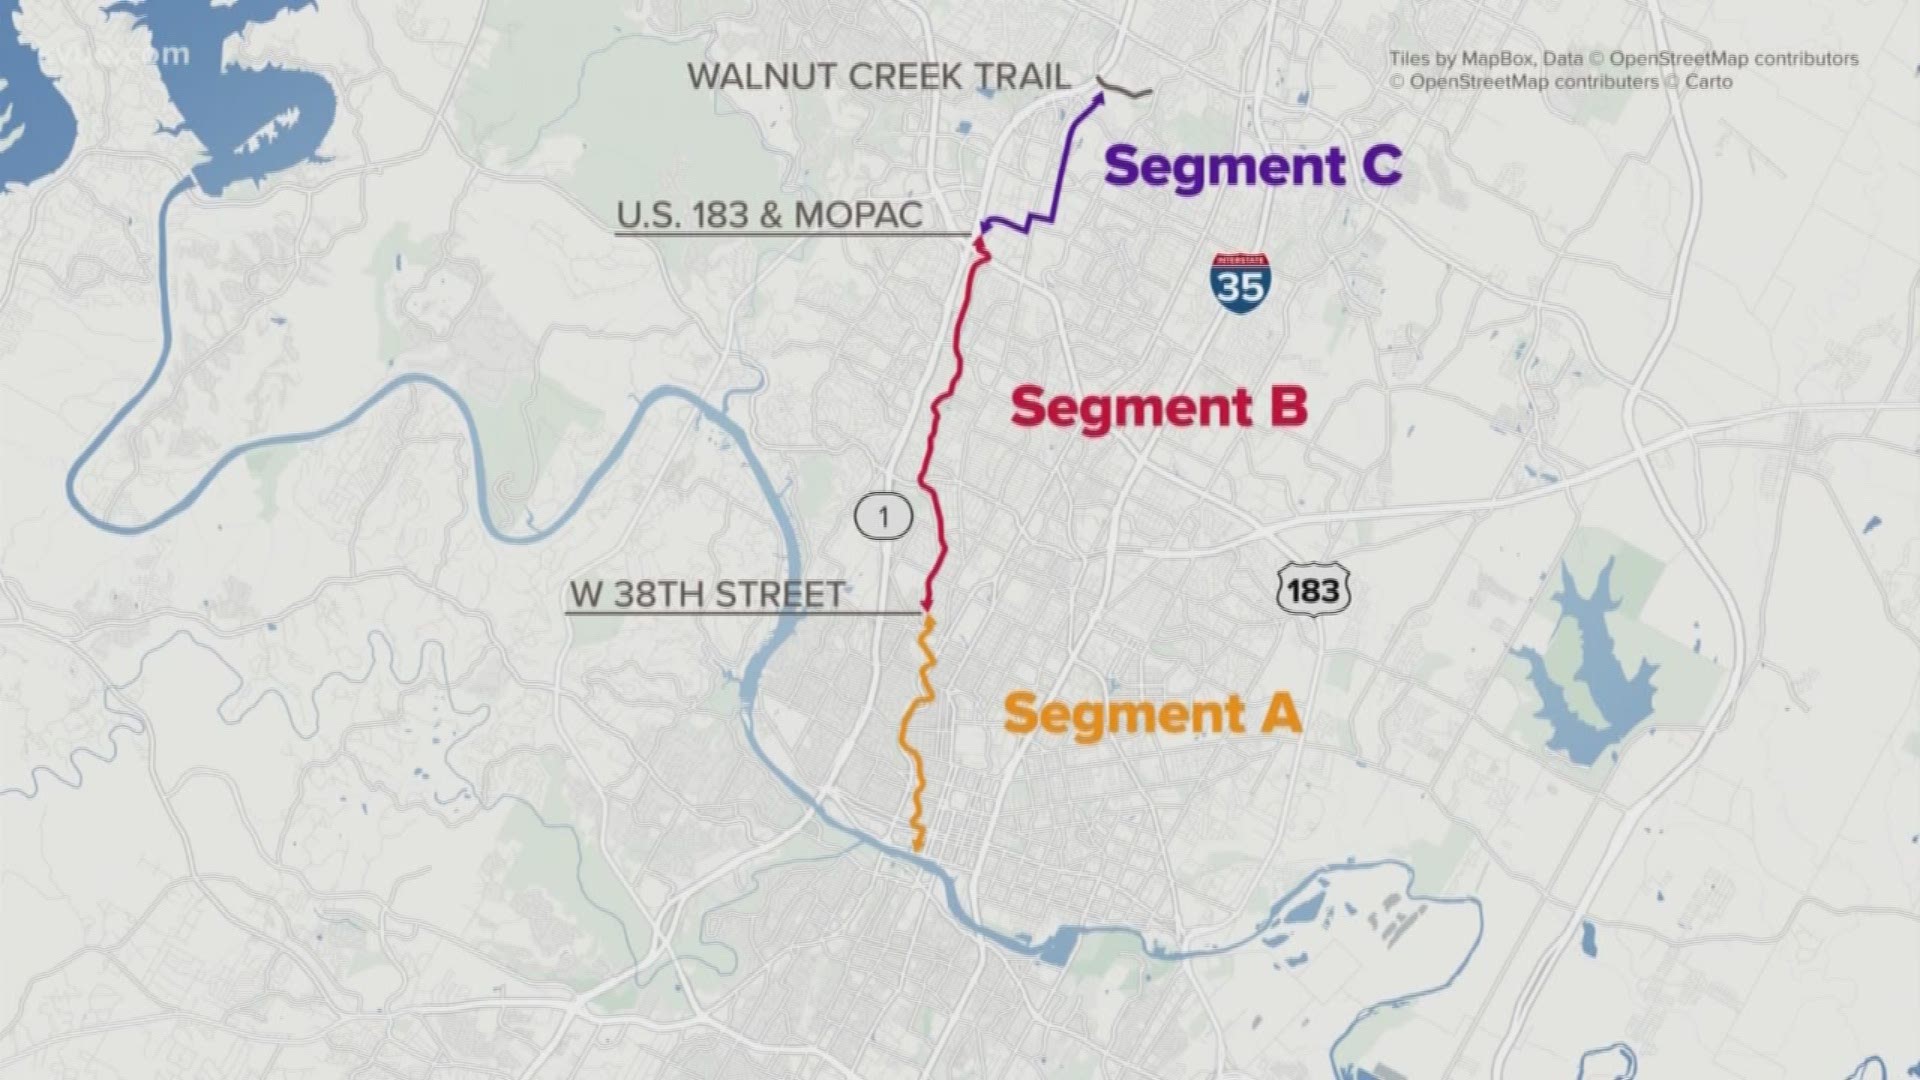 Major changes could be coming to one of Austin's popular hike-and-bike trails.